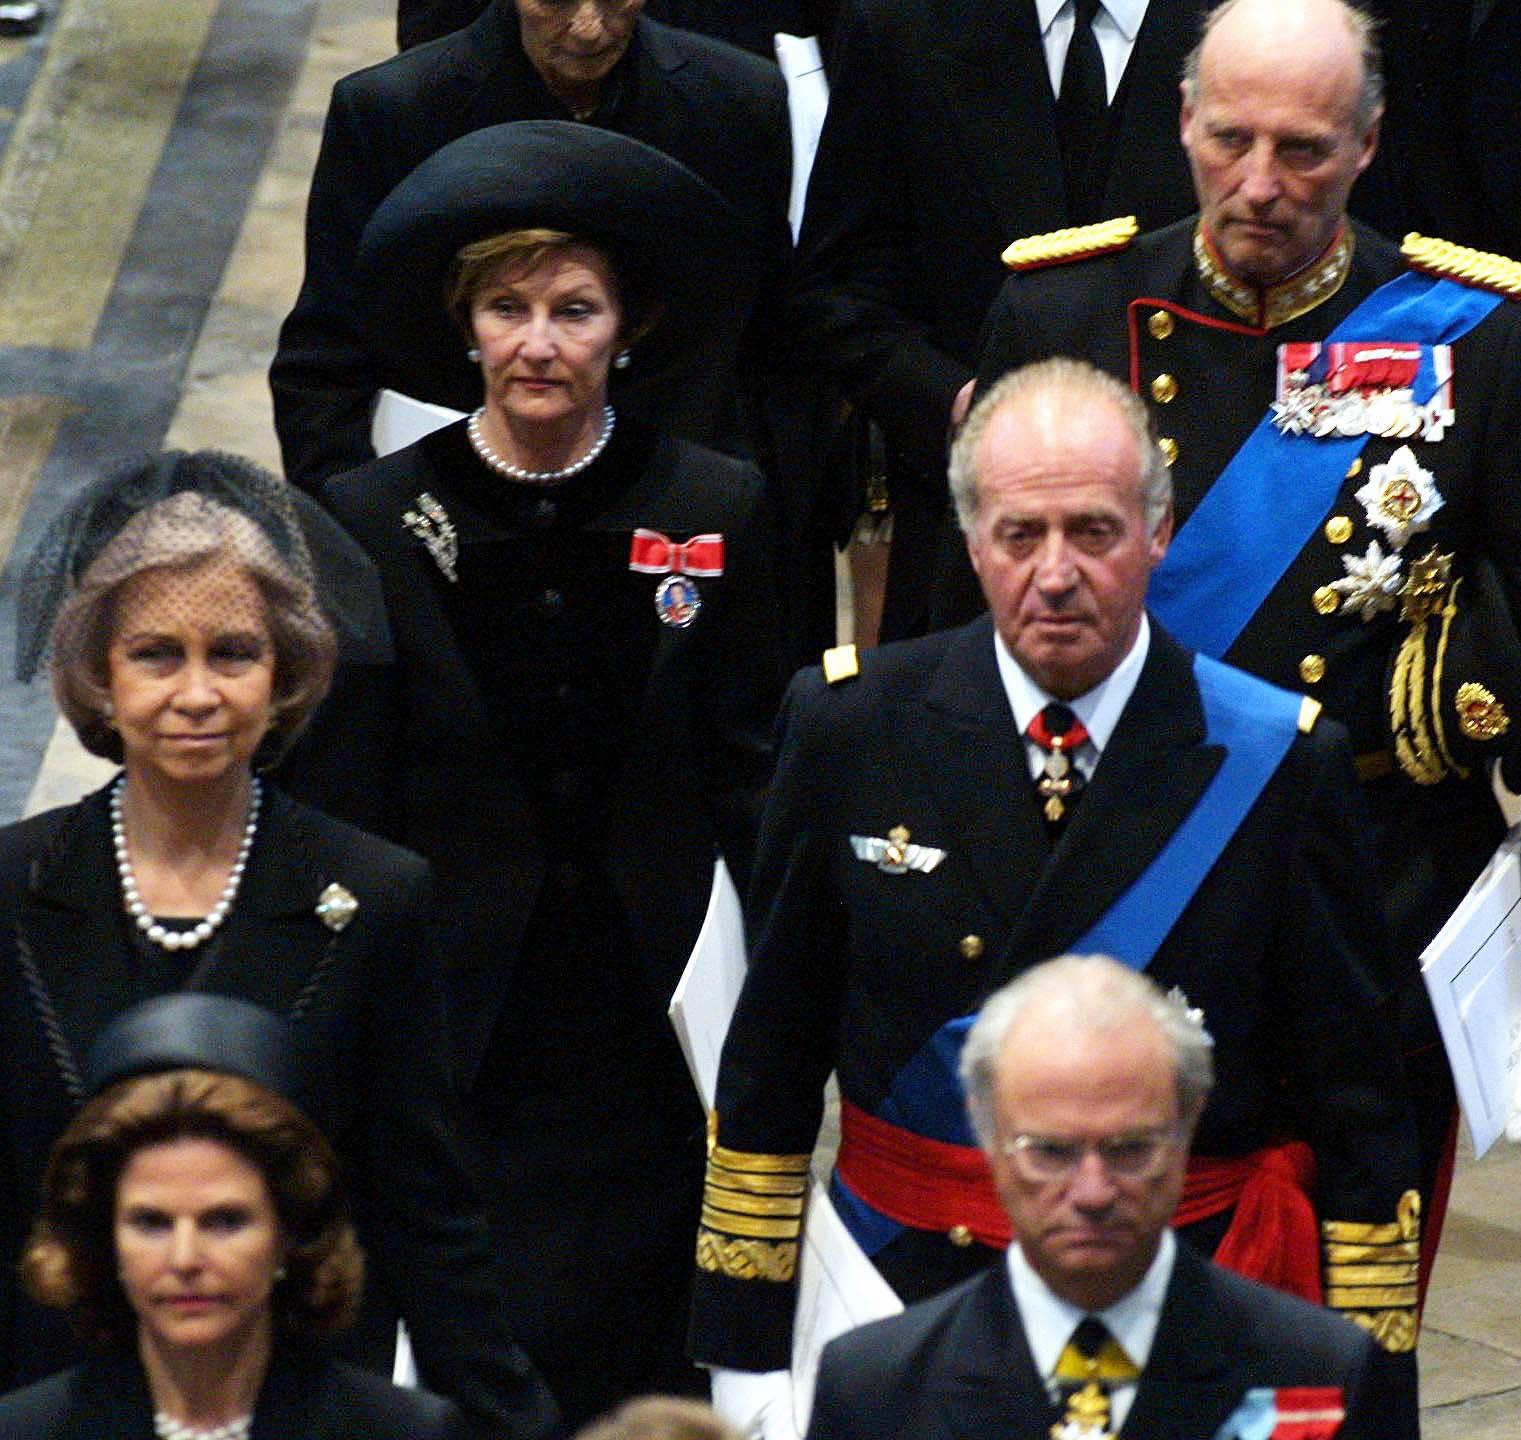 <p>Many global royals attended the funeral of Queen Elizabeth the Queen Mother on April 9, 2002. A few of them -- Sweden's King Carl XVI Gustaf and Queen Silvia (front), Spain's then-King Juan Carlos and Queen Sofia (center) and Norway's King Harald V and Queen Sonja (rear) -- are seen leaving Westminster Abbey in London following the funeral service, which was the culmination of more than a week of mourning for the royal matriarch, who died that March 30 at 101.</p>